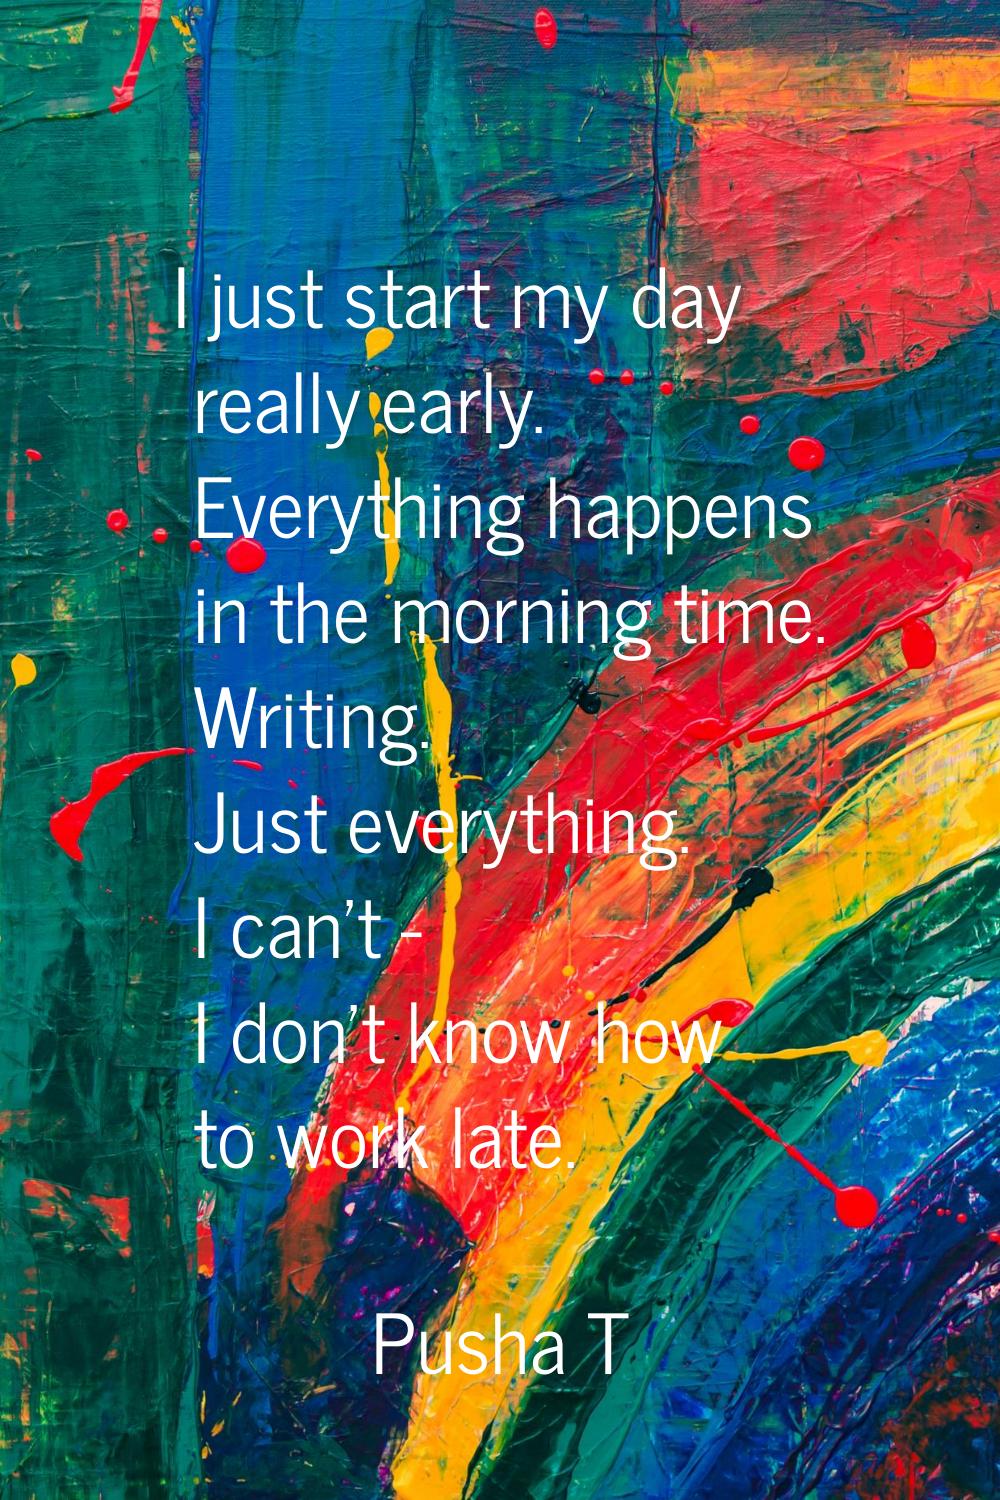 I just start my day really early. Everything happens in the morning time. Writing. Just everything.